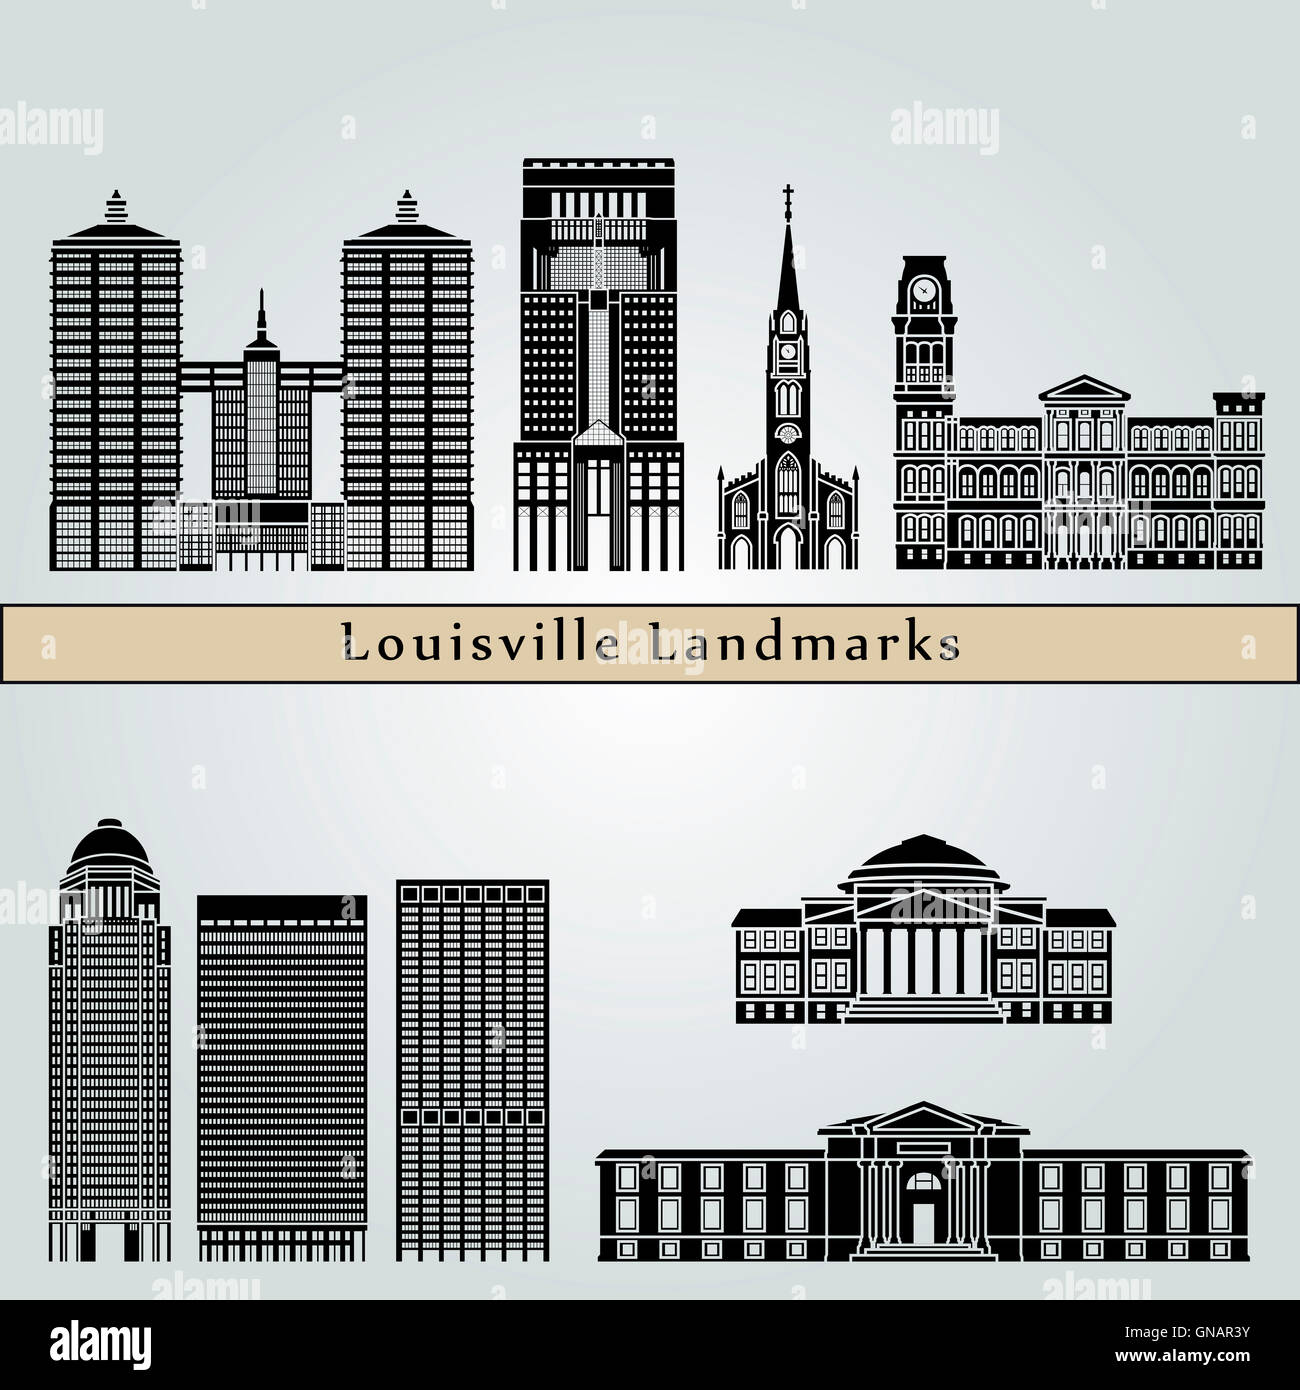 Louisville Silhouette Skyline Recessed Framed Print by RayHyra